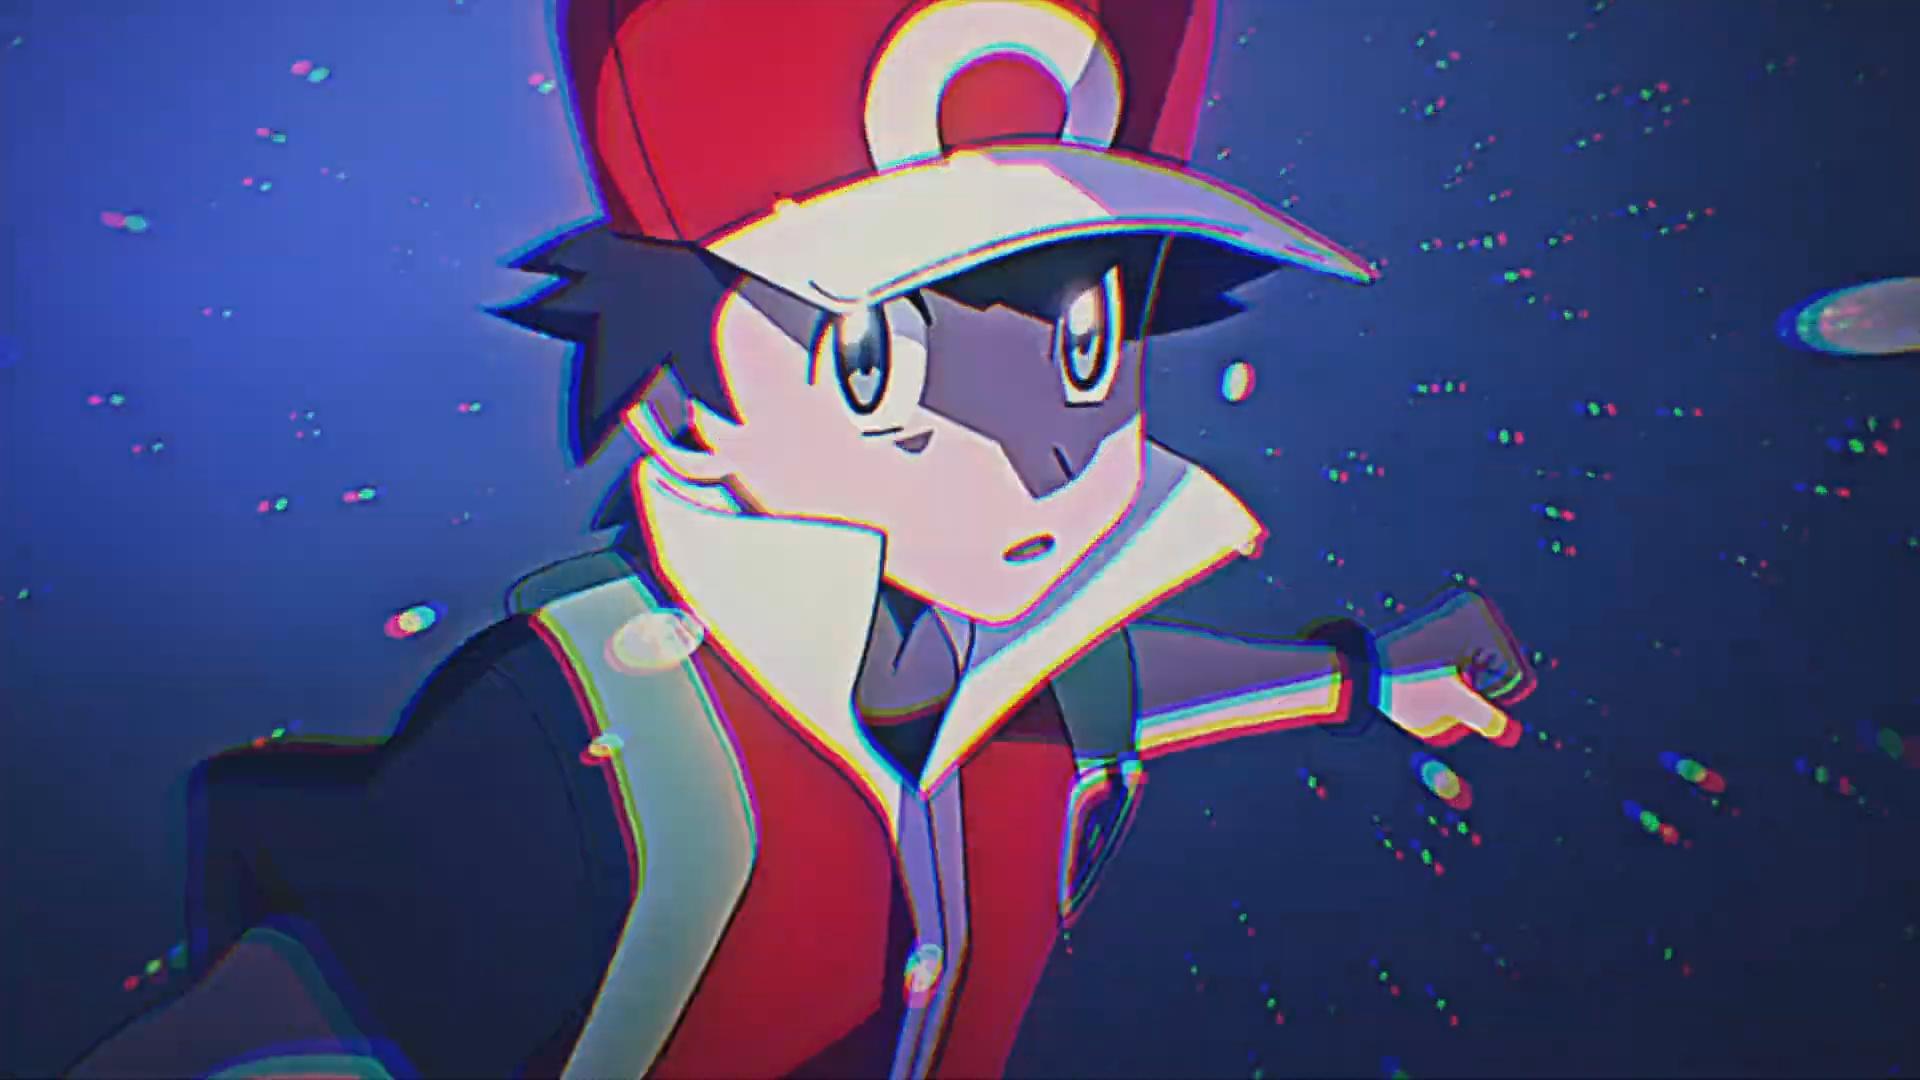 Pokemon music video overwhelms fans with nostalgia | GMA News Online